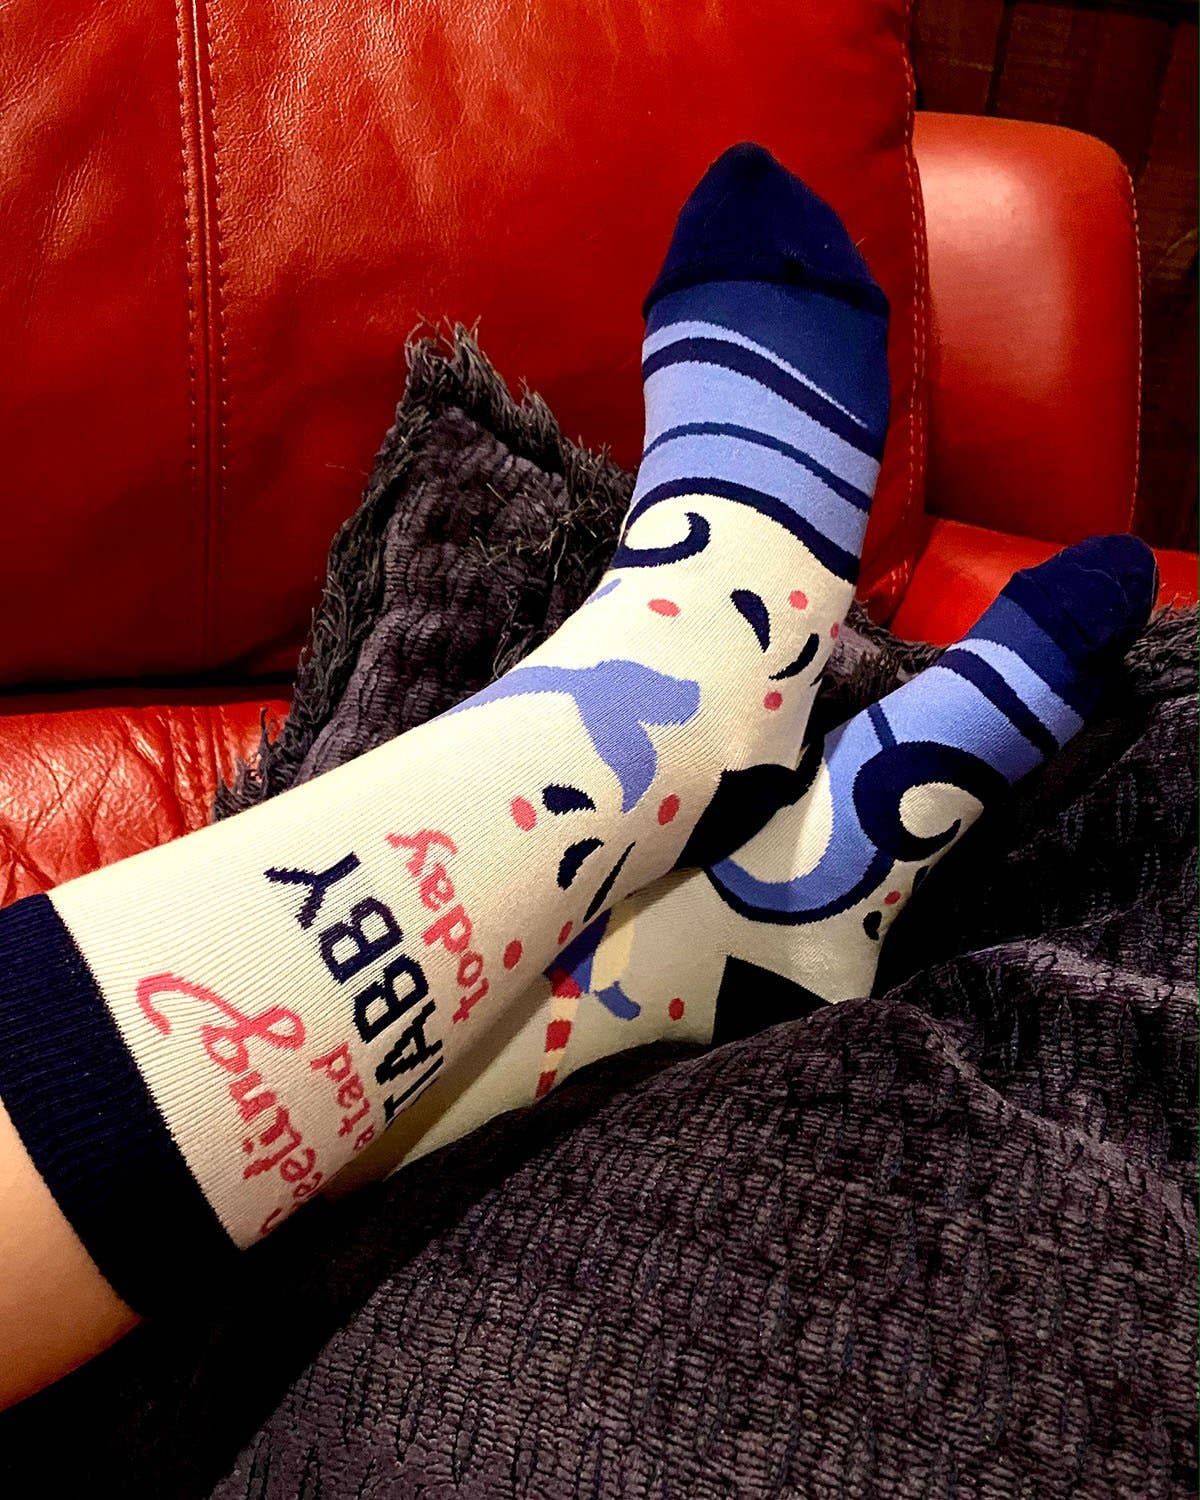 Feeling a Tad Stabby Today Narwhal Women's Crew Socks